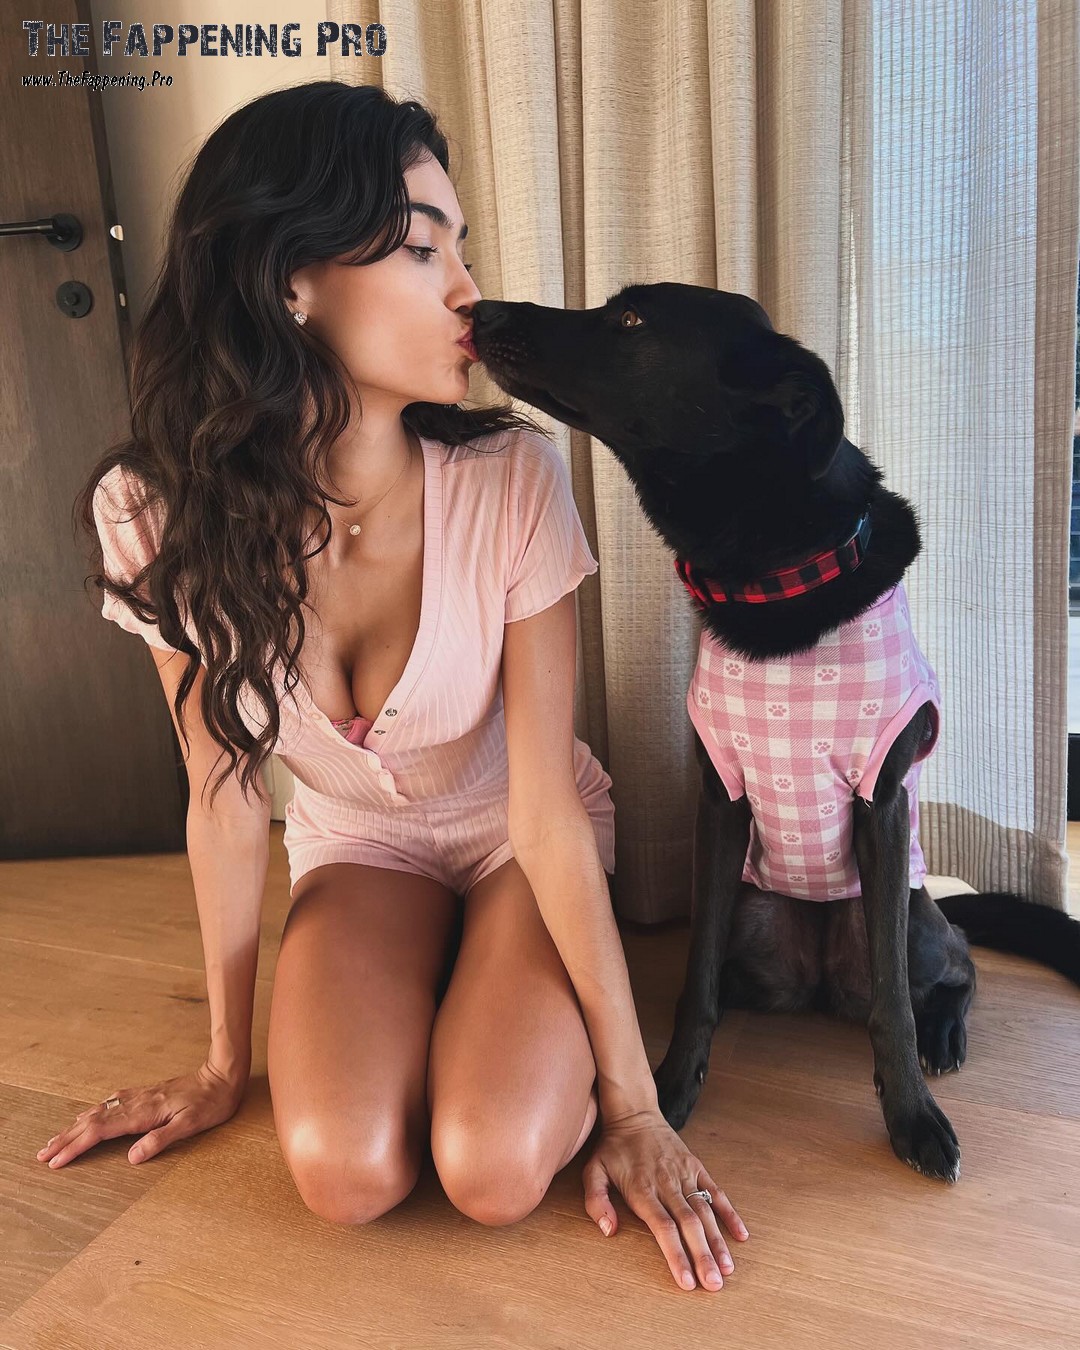 Get ready for some jaw-dropping fashion moments as Kelly Gale, the ambassador of Fashionnova, breaks all boundaries by dressing up her dog in their latest outfit. As if that wasn't enough, Kelly herself stuns in a sexy homemade bodysuit, barefoot and oozing confidence. But things take a bizarre turn as she is seen kissing her furry friend, leaving fans divided. Despite the controversy, her fans can't get enough of these daring photos. Get the full scoop on this unexpected fashion saga now!